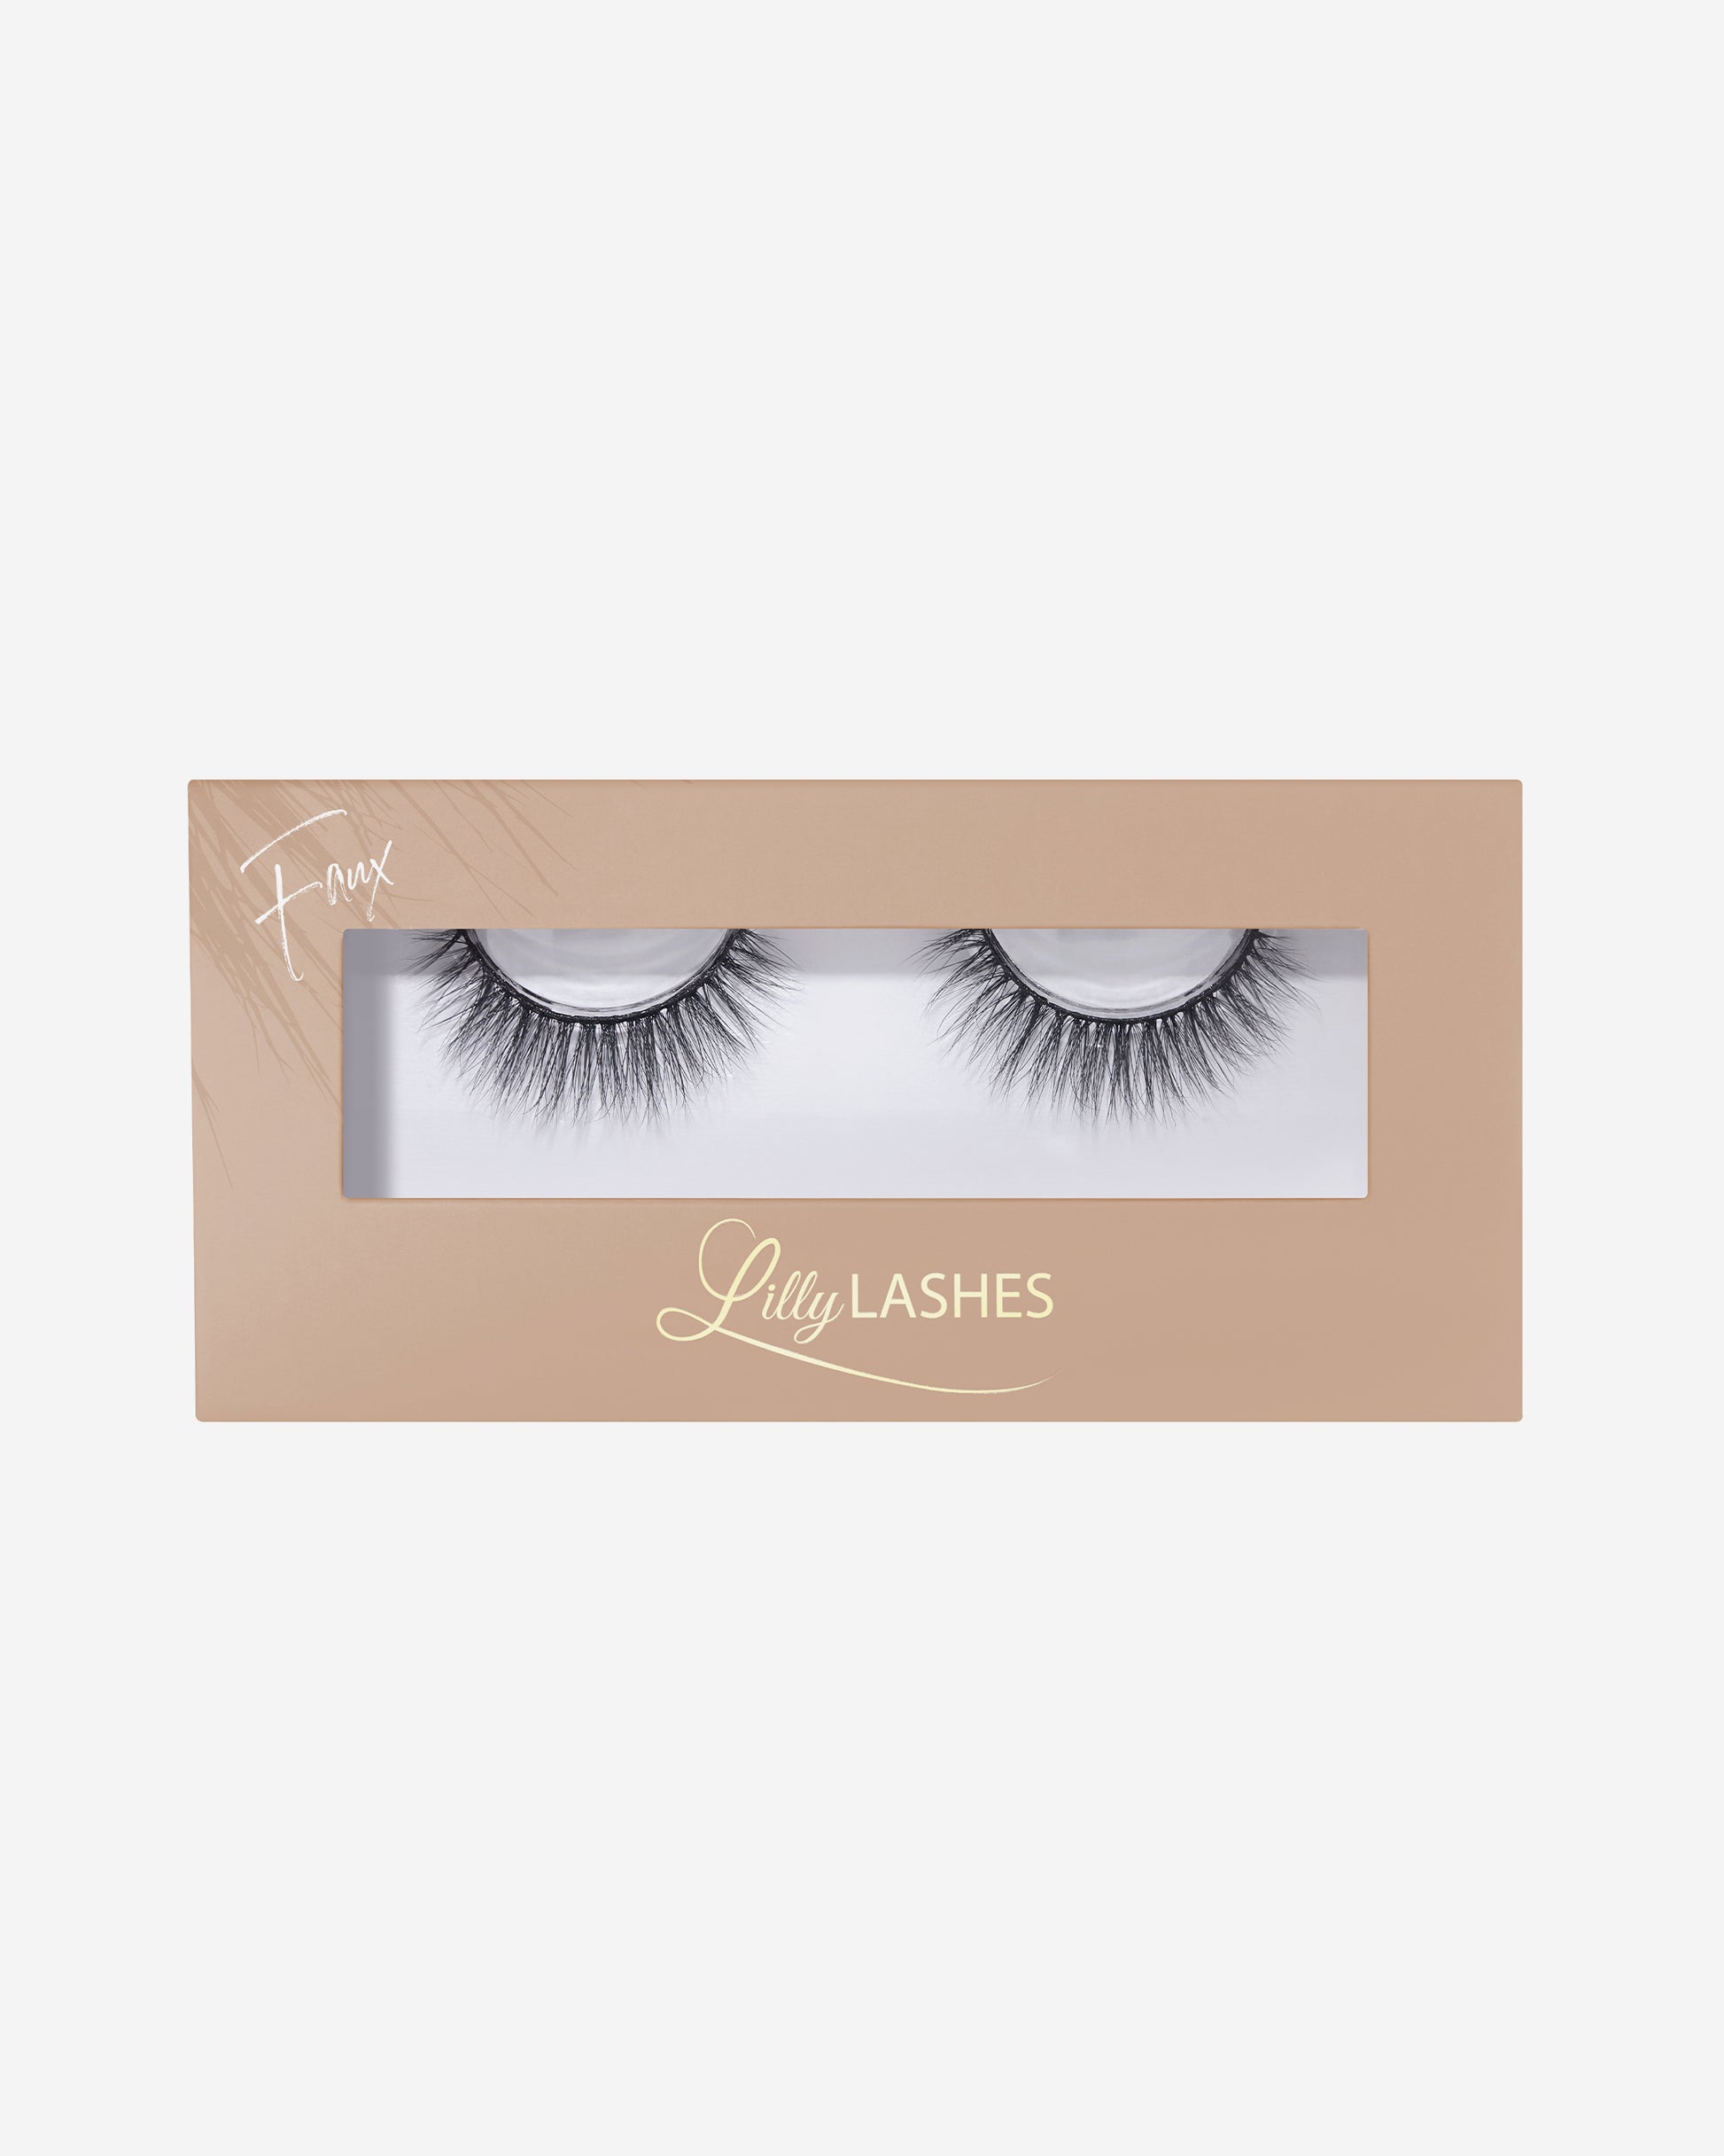 Lilly Lashes | Everyday | Minimal | Front of Box